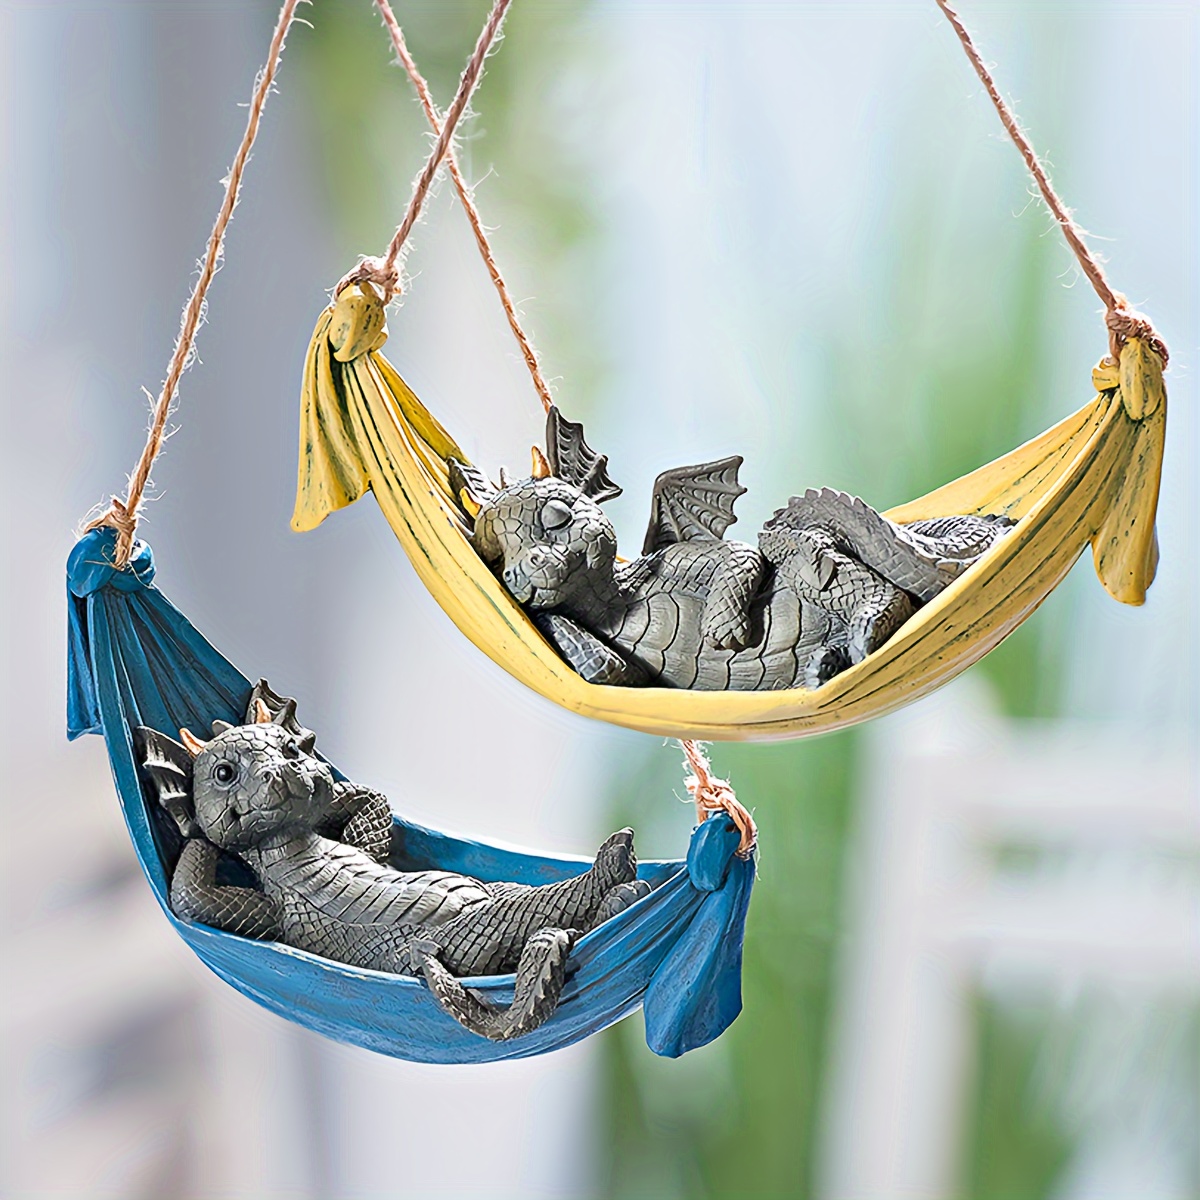 

Art Deco Dragon Hammock Hanging Statue - Resin Animal Sculpture For Home & Garden, Wall-mountable Outdoor Decor, Ideal For Halloween & Dragon Lovers, No Battery Needed